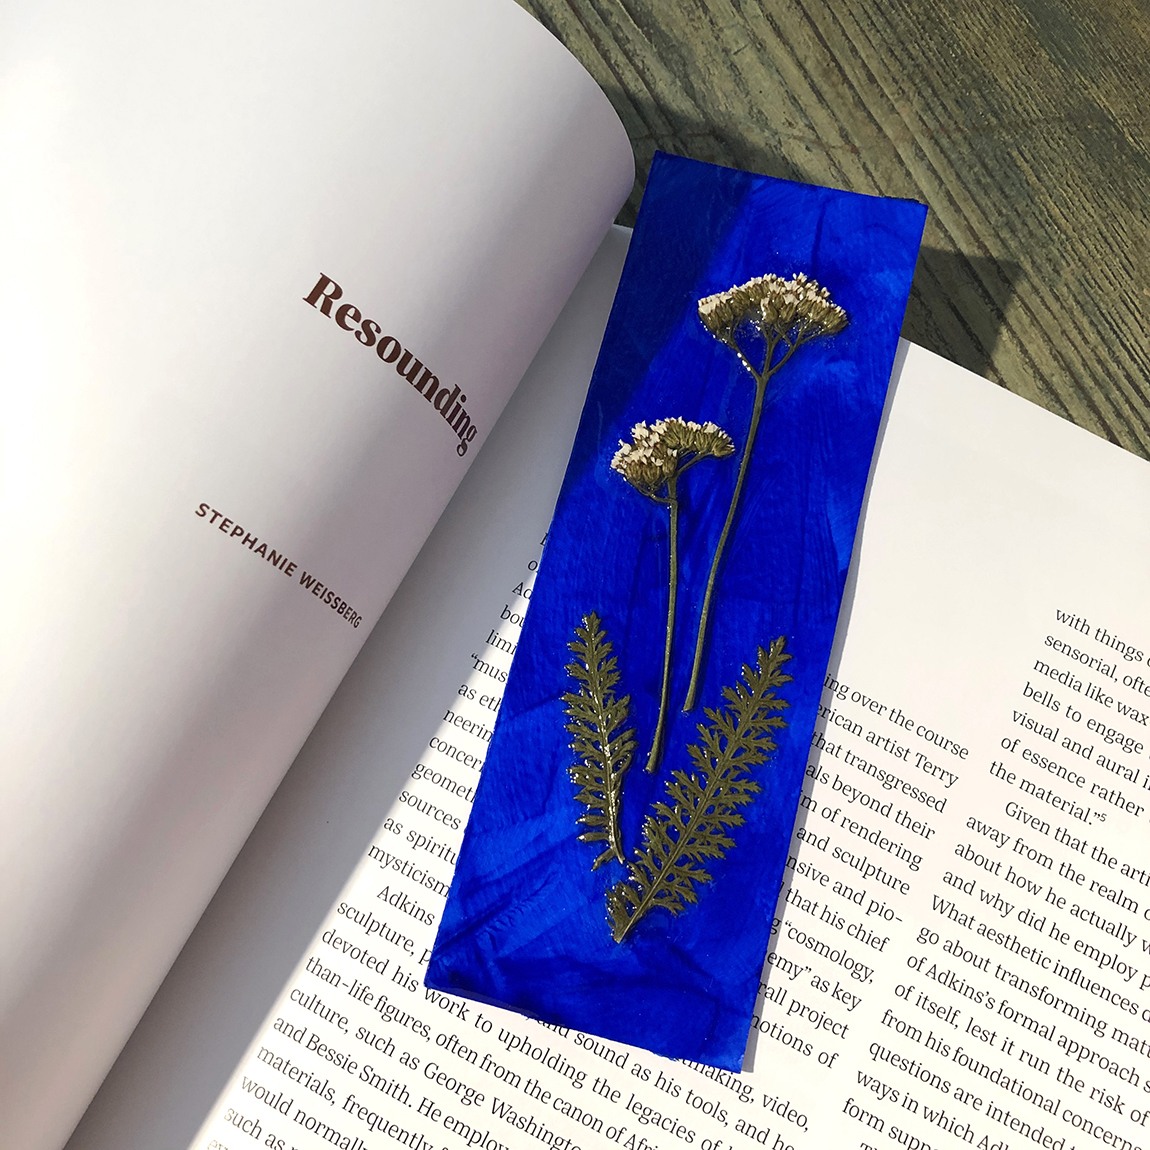 Four pressed plants sealed to an ultramarine paper bookmark, sitting on a page of the exhibition catalogue for "Terry Adkins: Resounding."